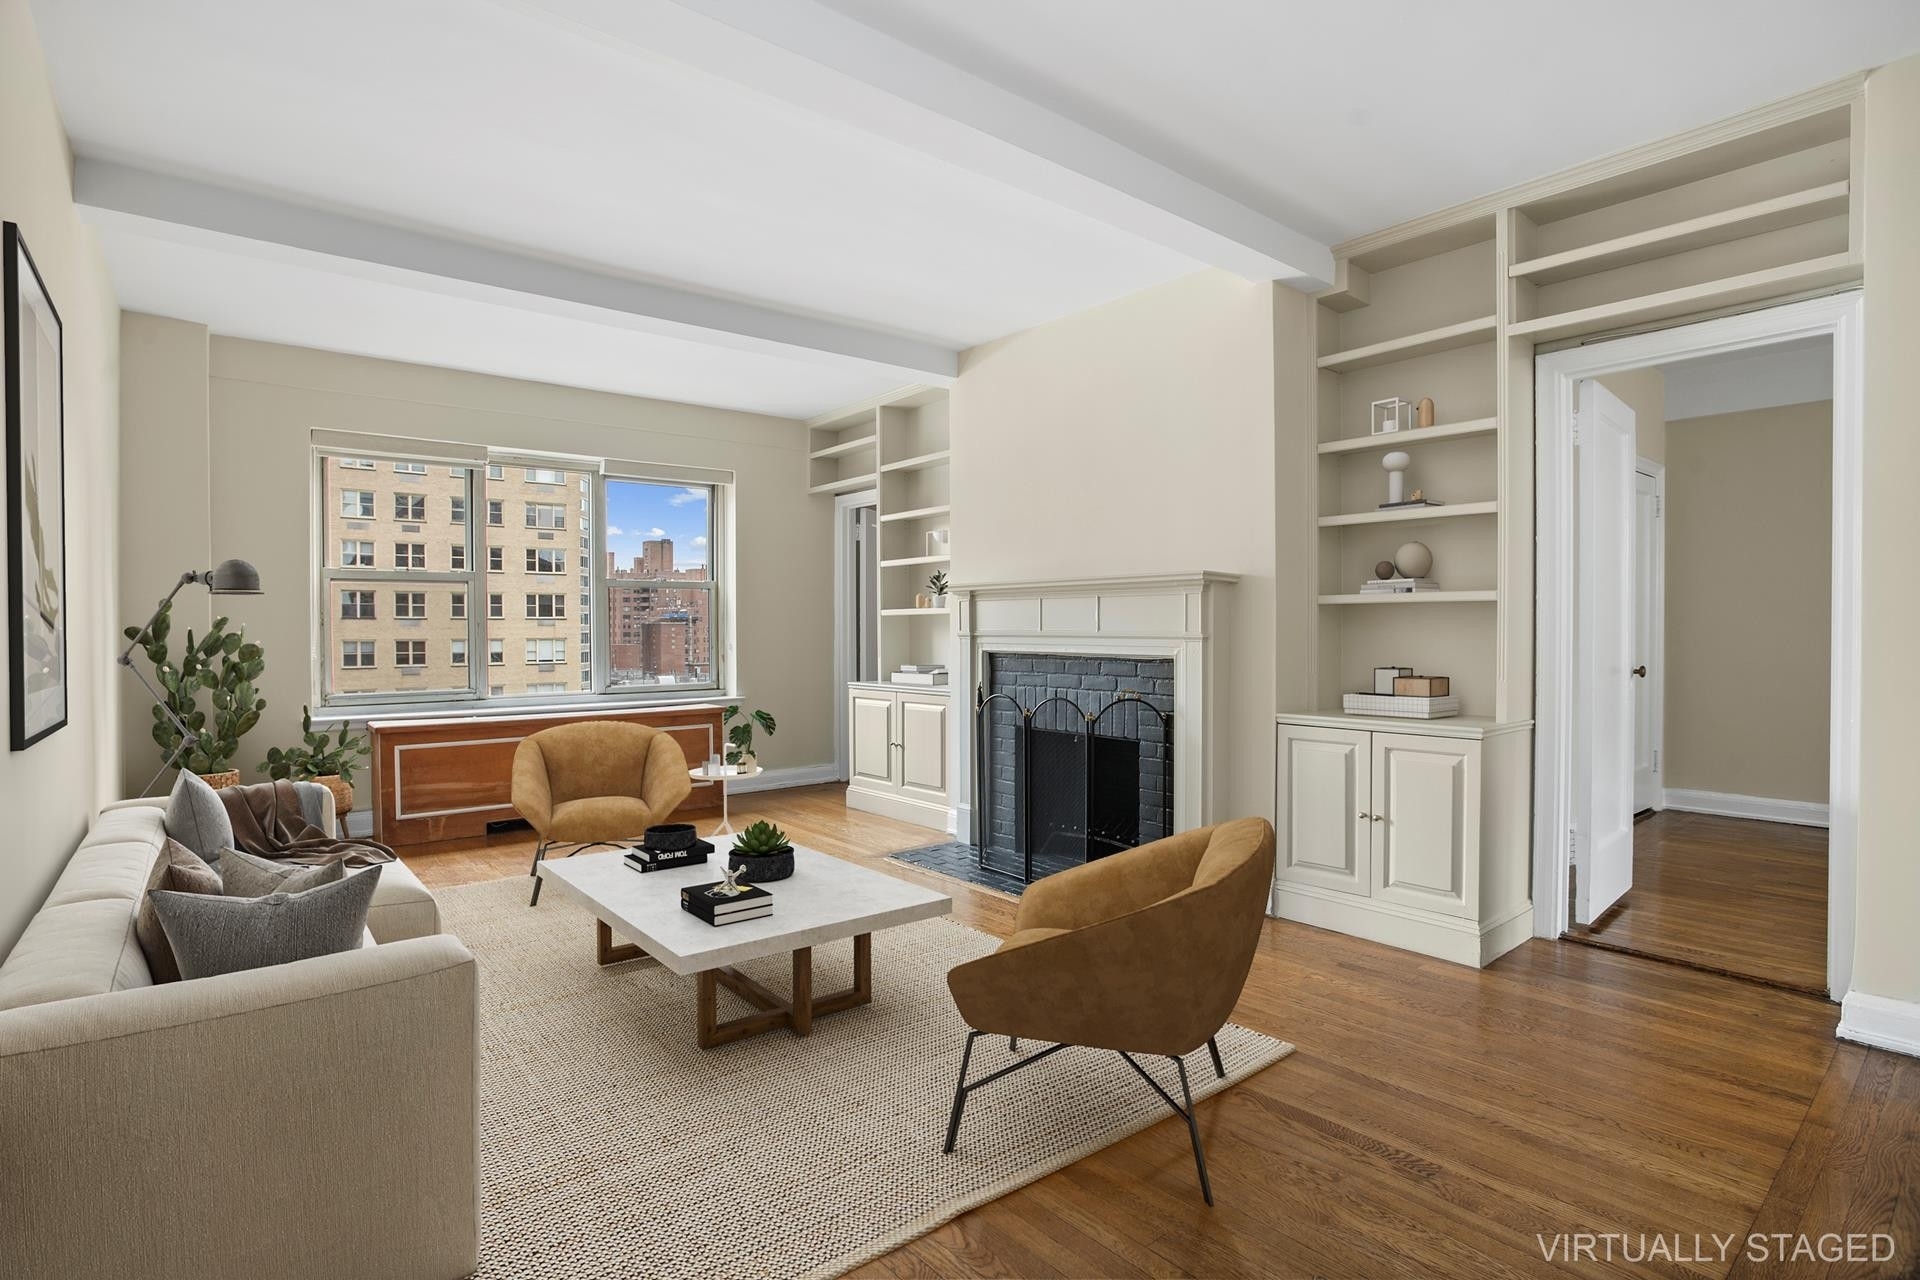 Co-op Properties for Sale at Southgate, 400 E 52ND ST, 15A Beekman, New York, New York 10022